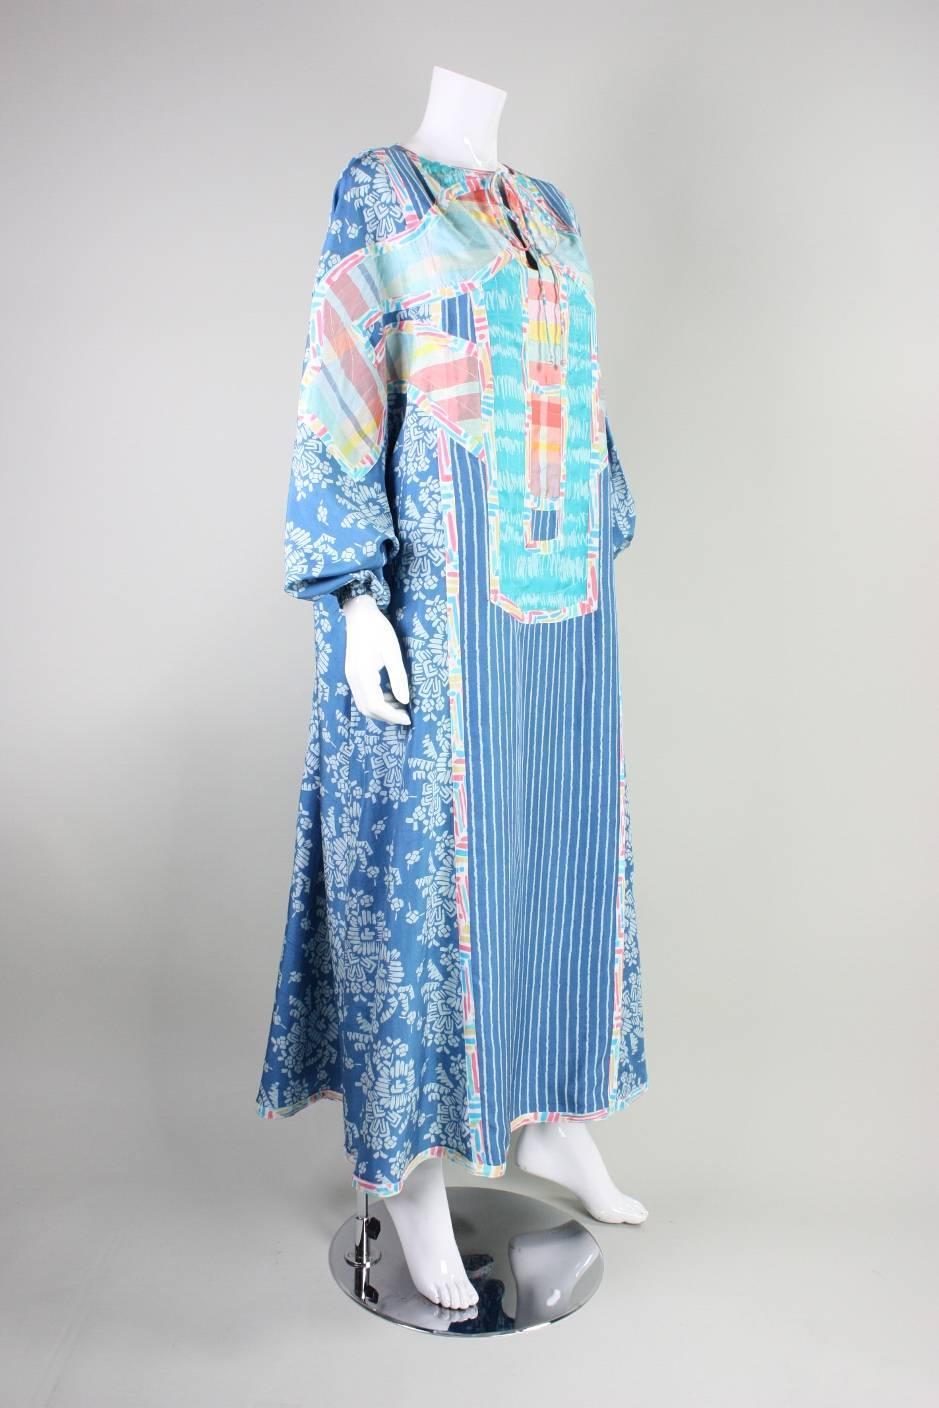 Vintage caftan from Koos Van Den Akker dates to the 1980's and is made of mixed patterns and colors of silk fabrics that are artfully pieced together.  Round neckline has center front slit and ties. Batwing sleeves have elasticized cuffs. Hip